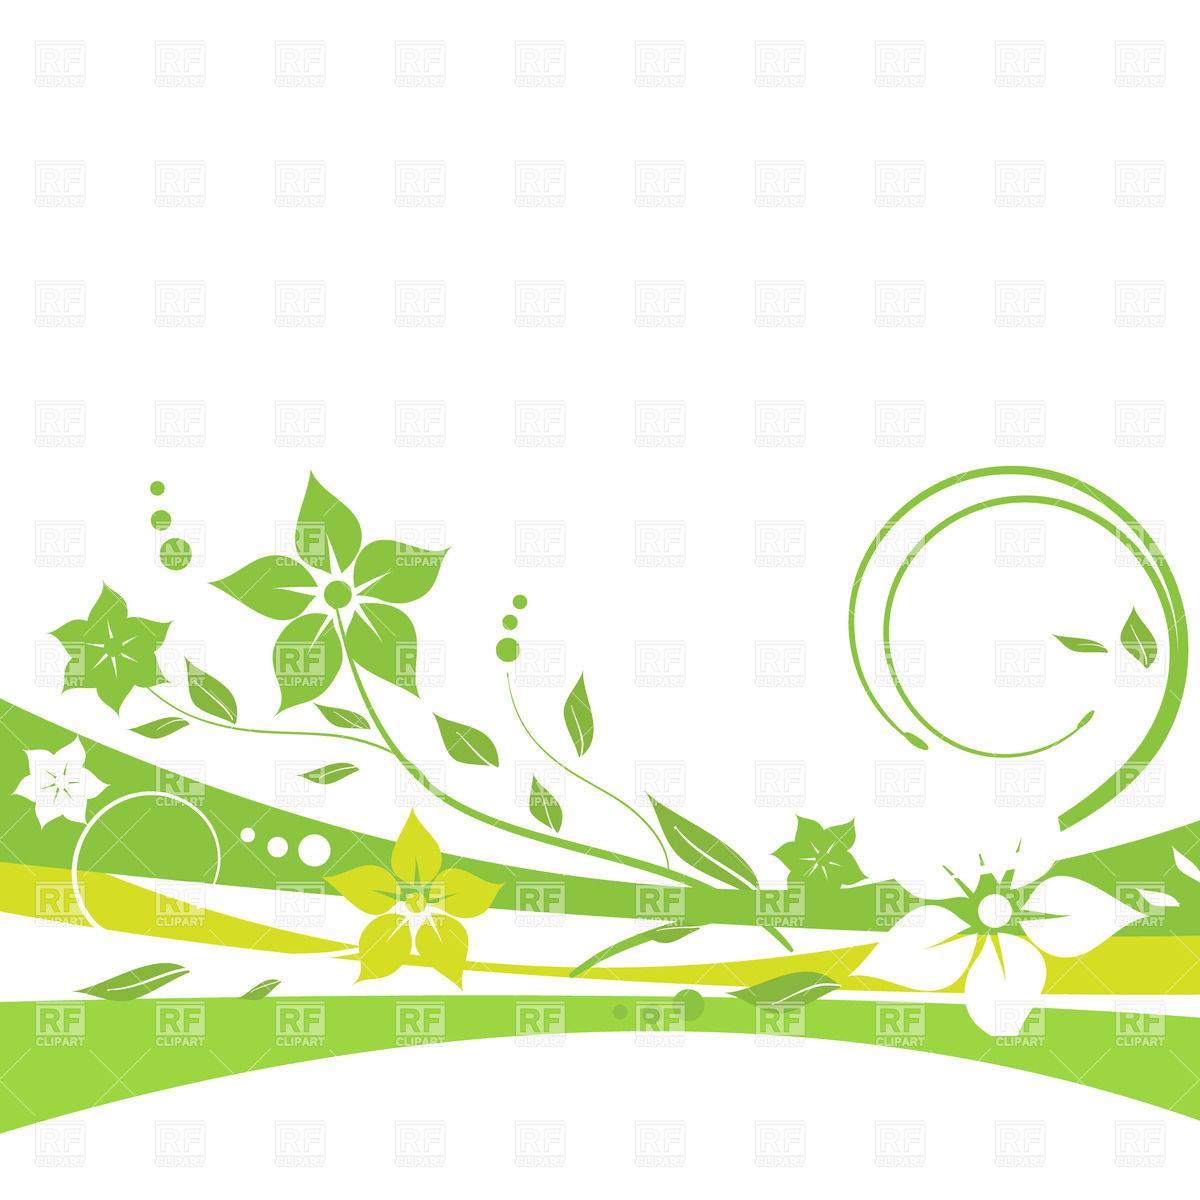 Green Floral Wavy Border Download Royalty Free Vector Clipart  Eps